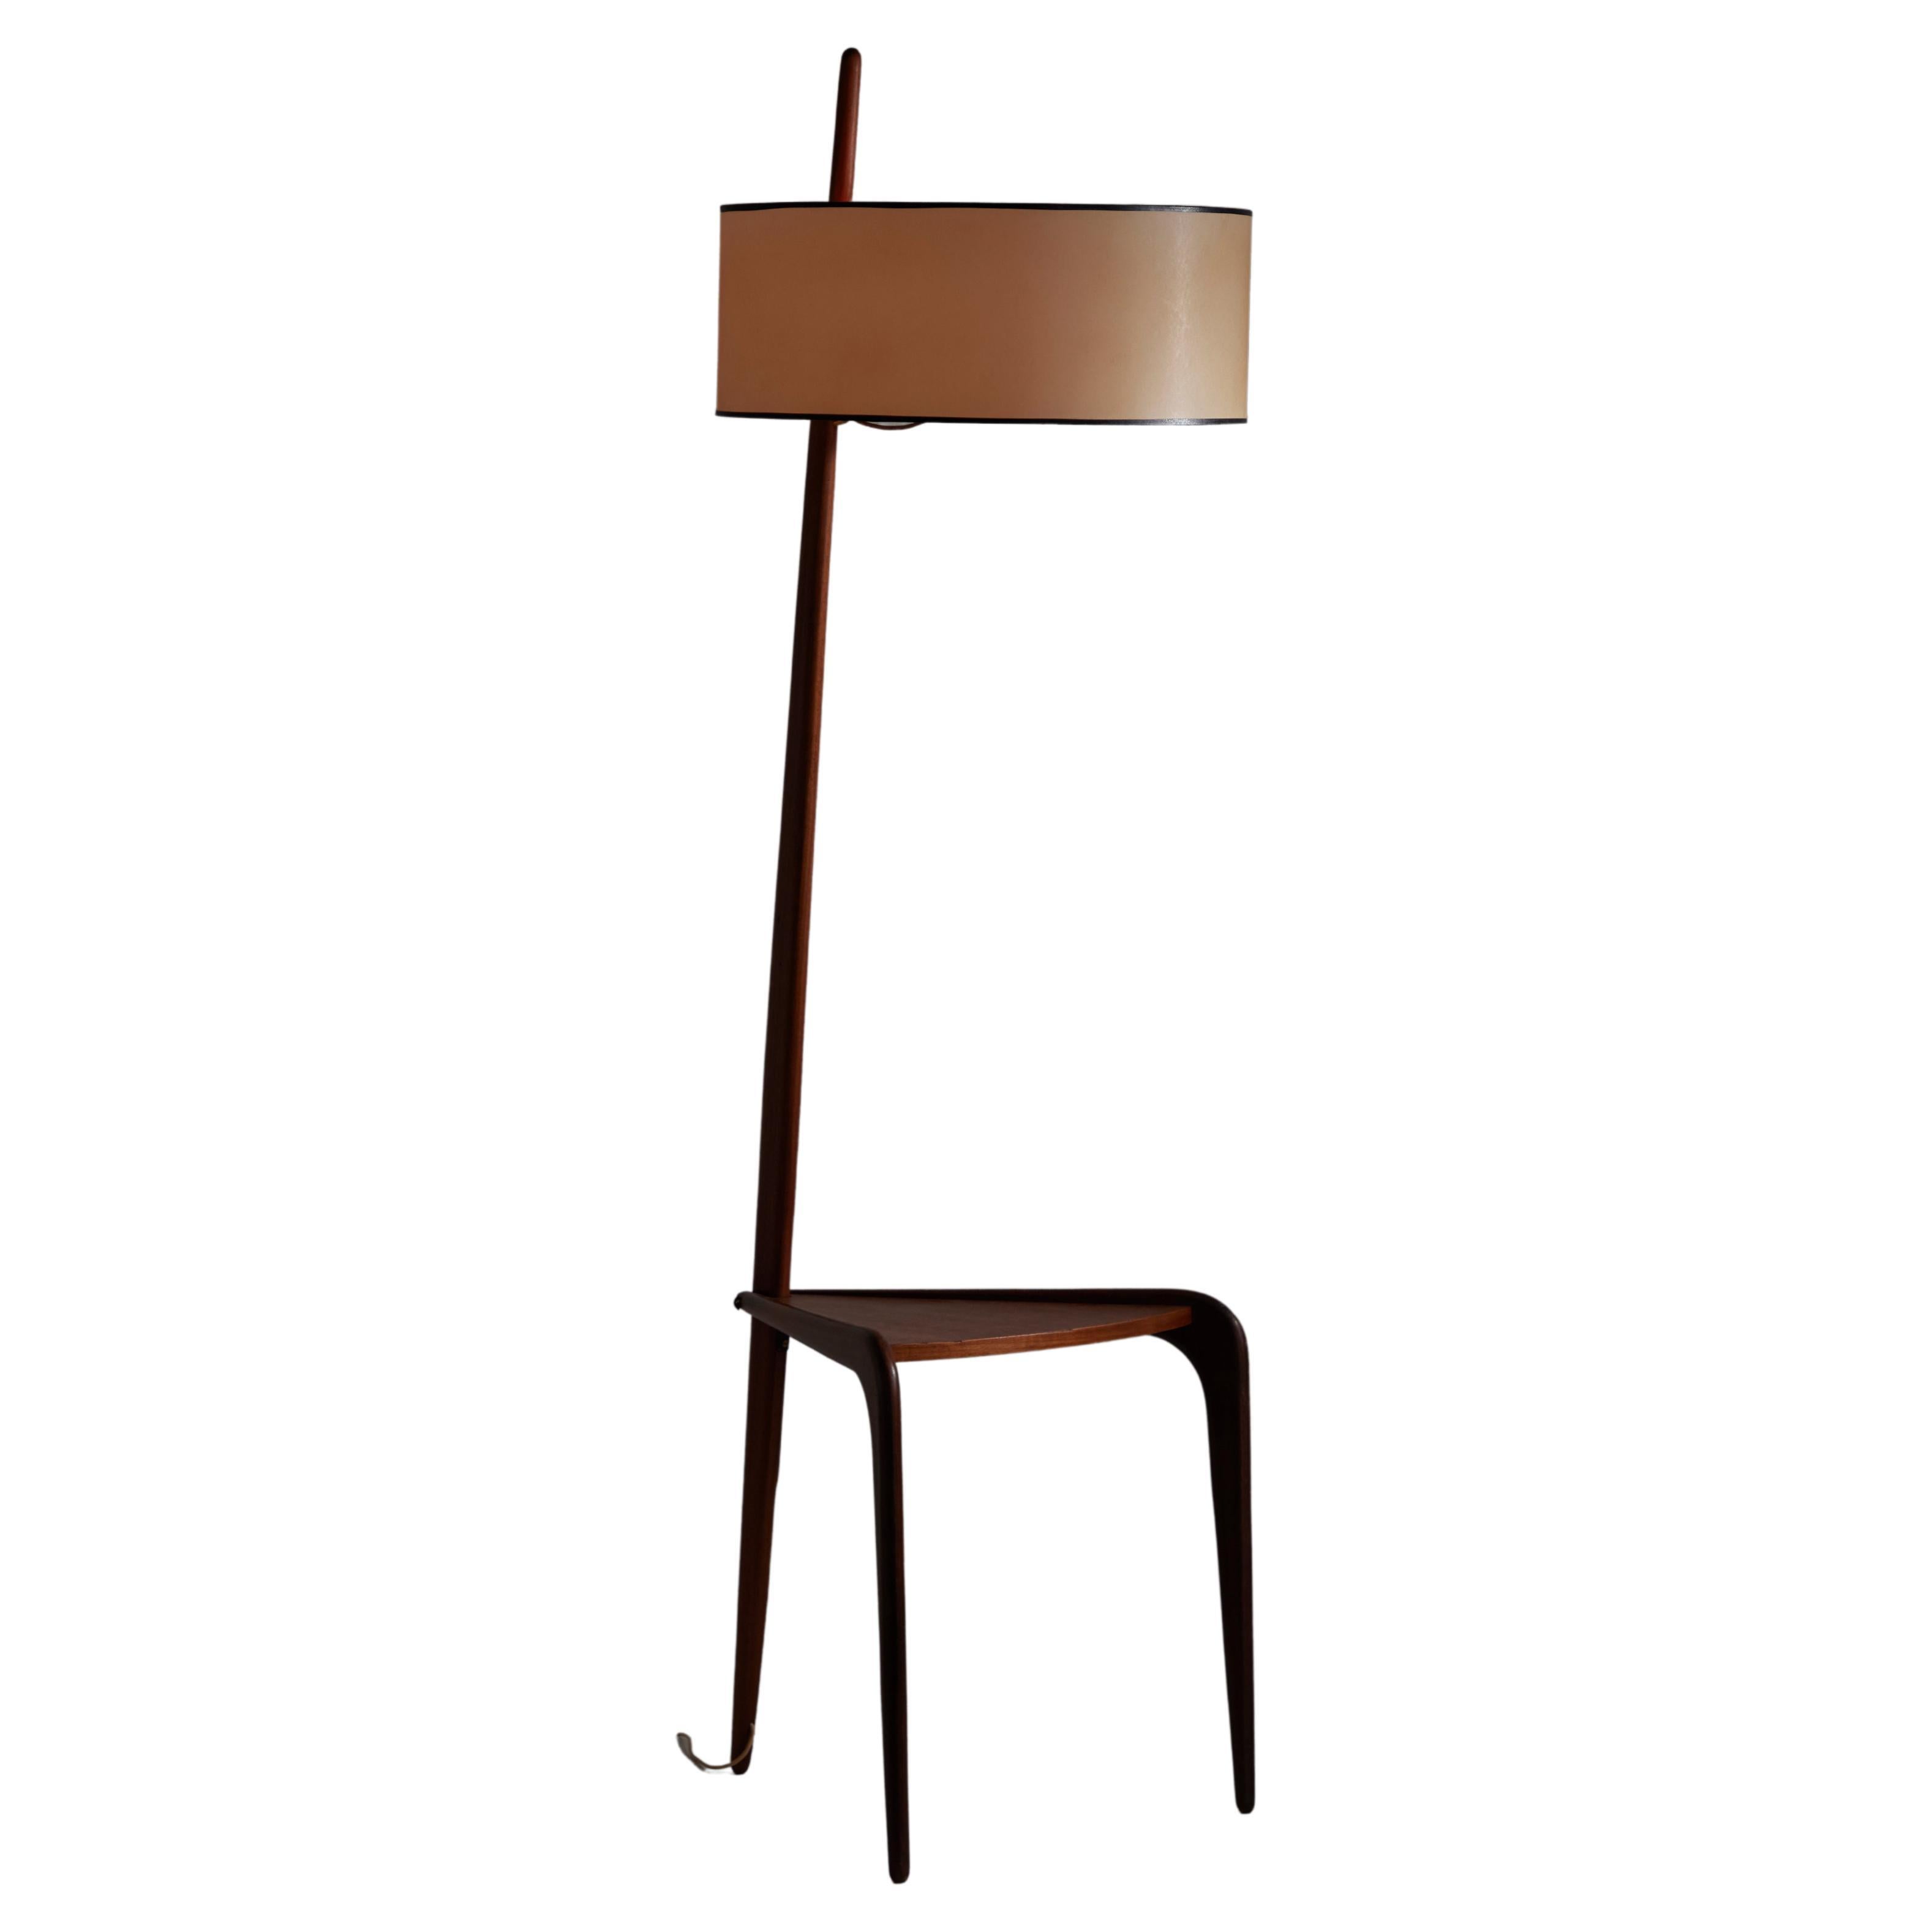 Rare Model 167.A82 Floor Lamp by Rispal For Sale at 1stDibs